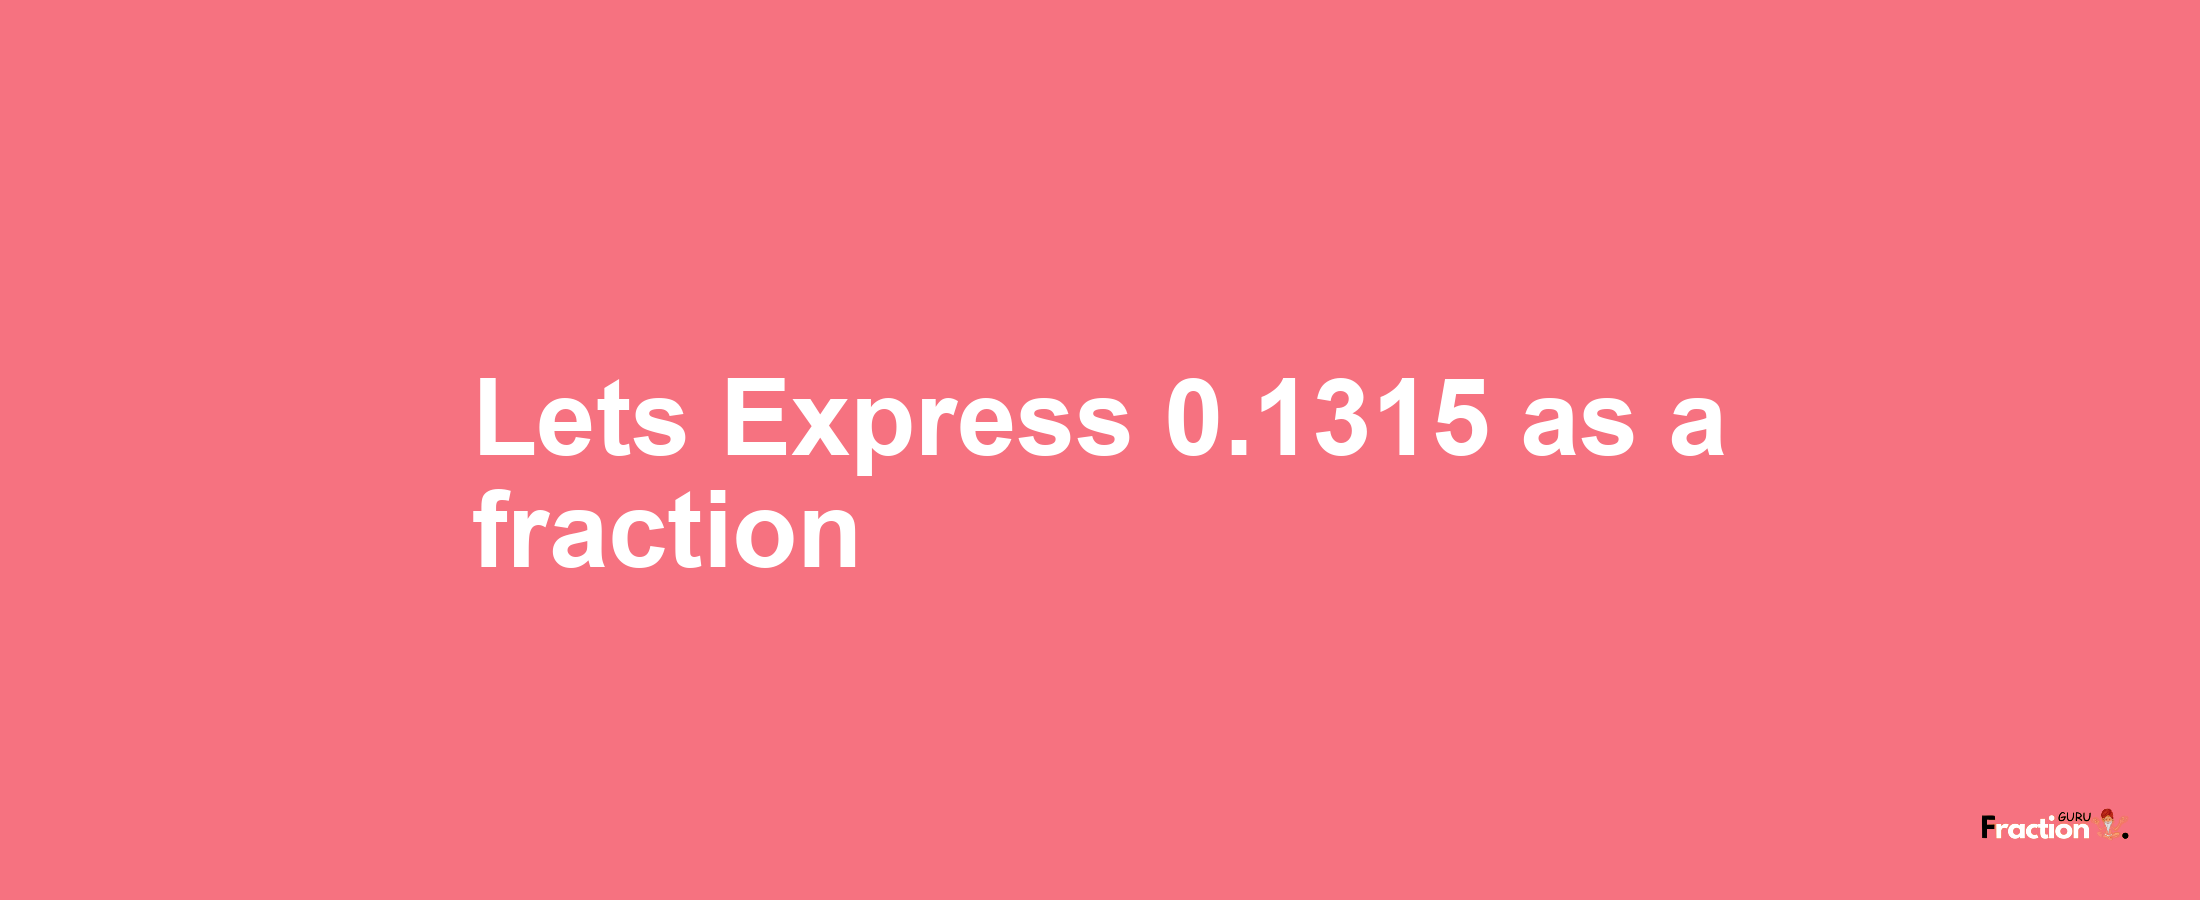 Lets Express 0.1315 as afraction